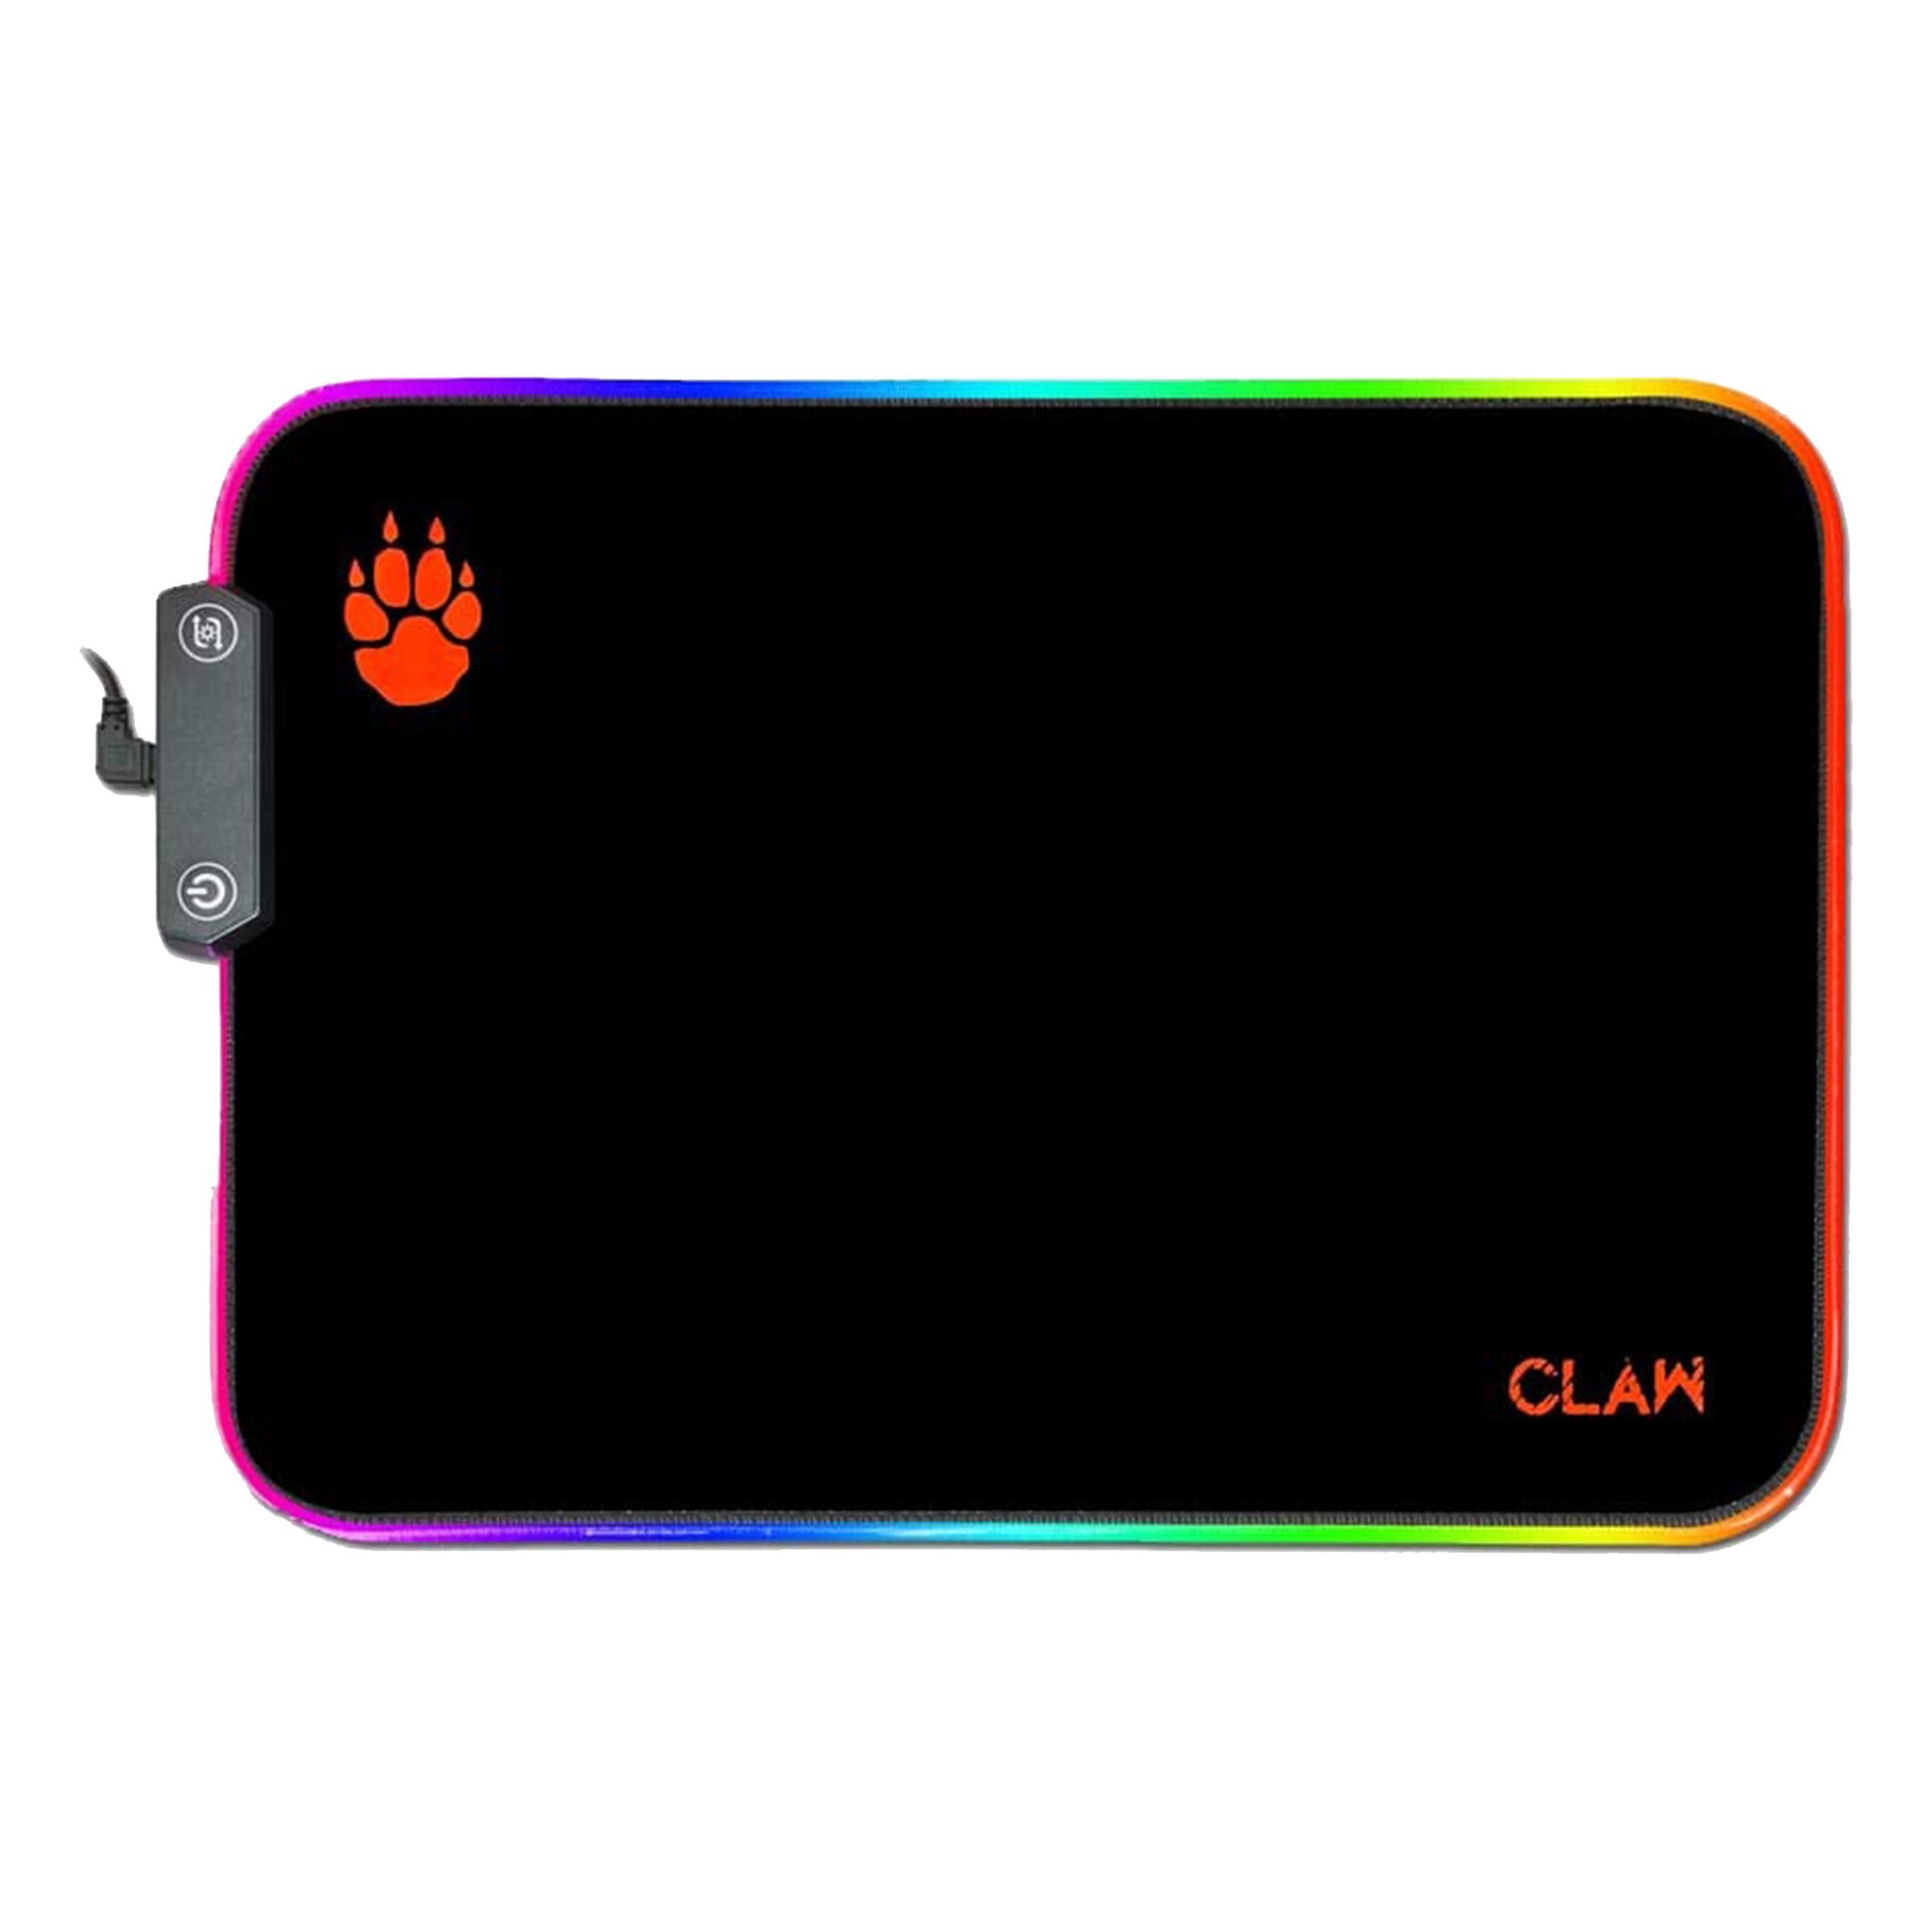 CLAW Slide Gaming Mouse Pad (14 Spectrum RGB Backlight Modes, ST-MP25A-S, Black)